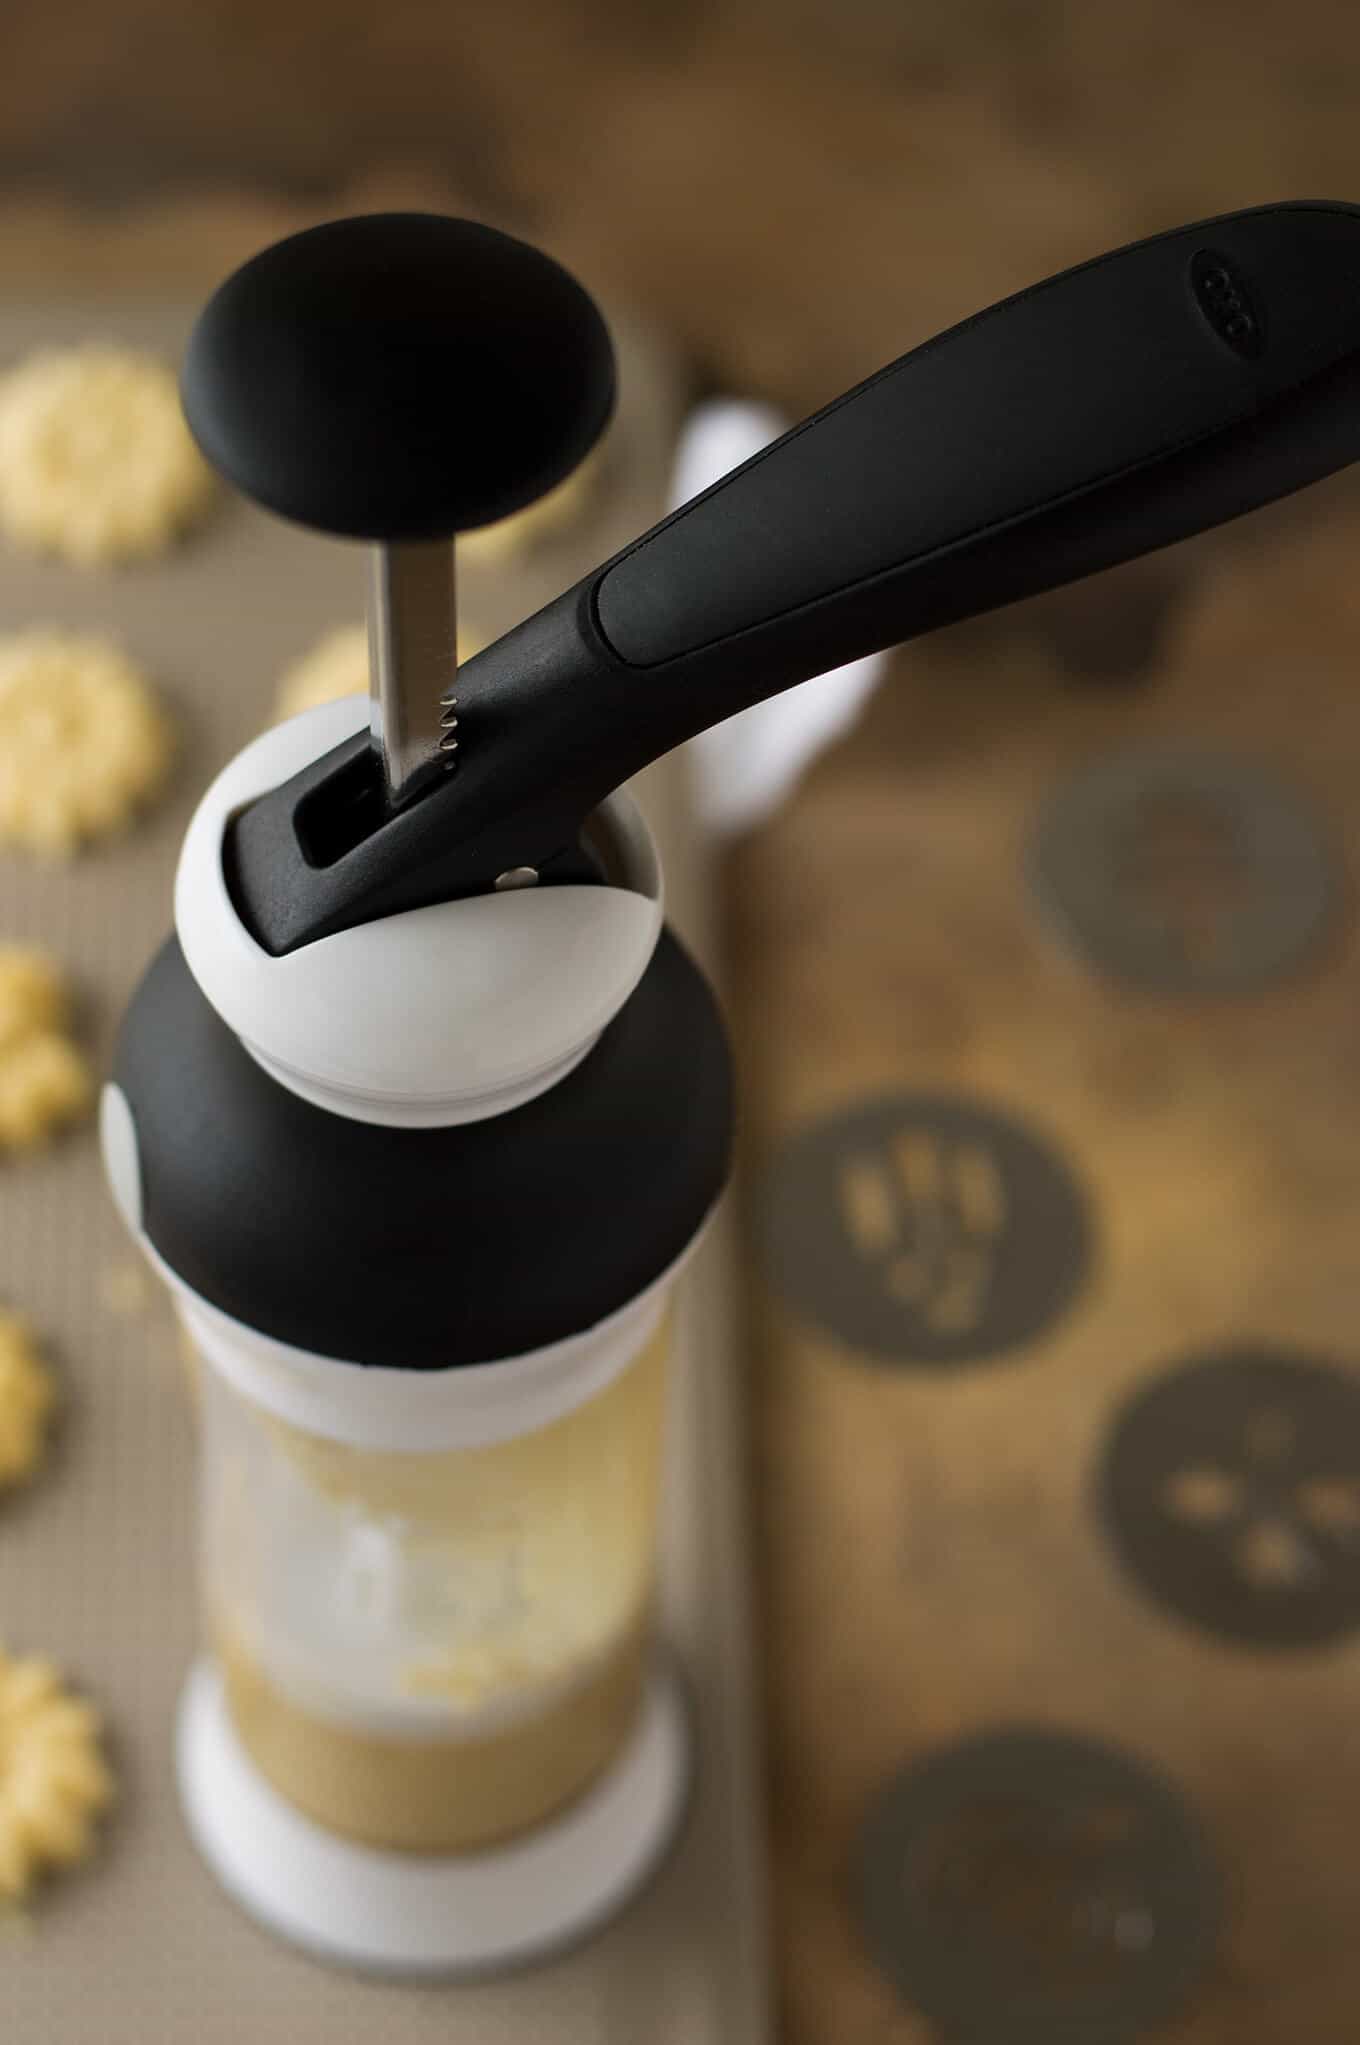 A cookie press filled with dough.